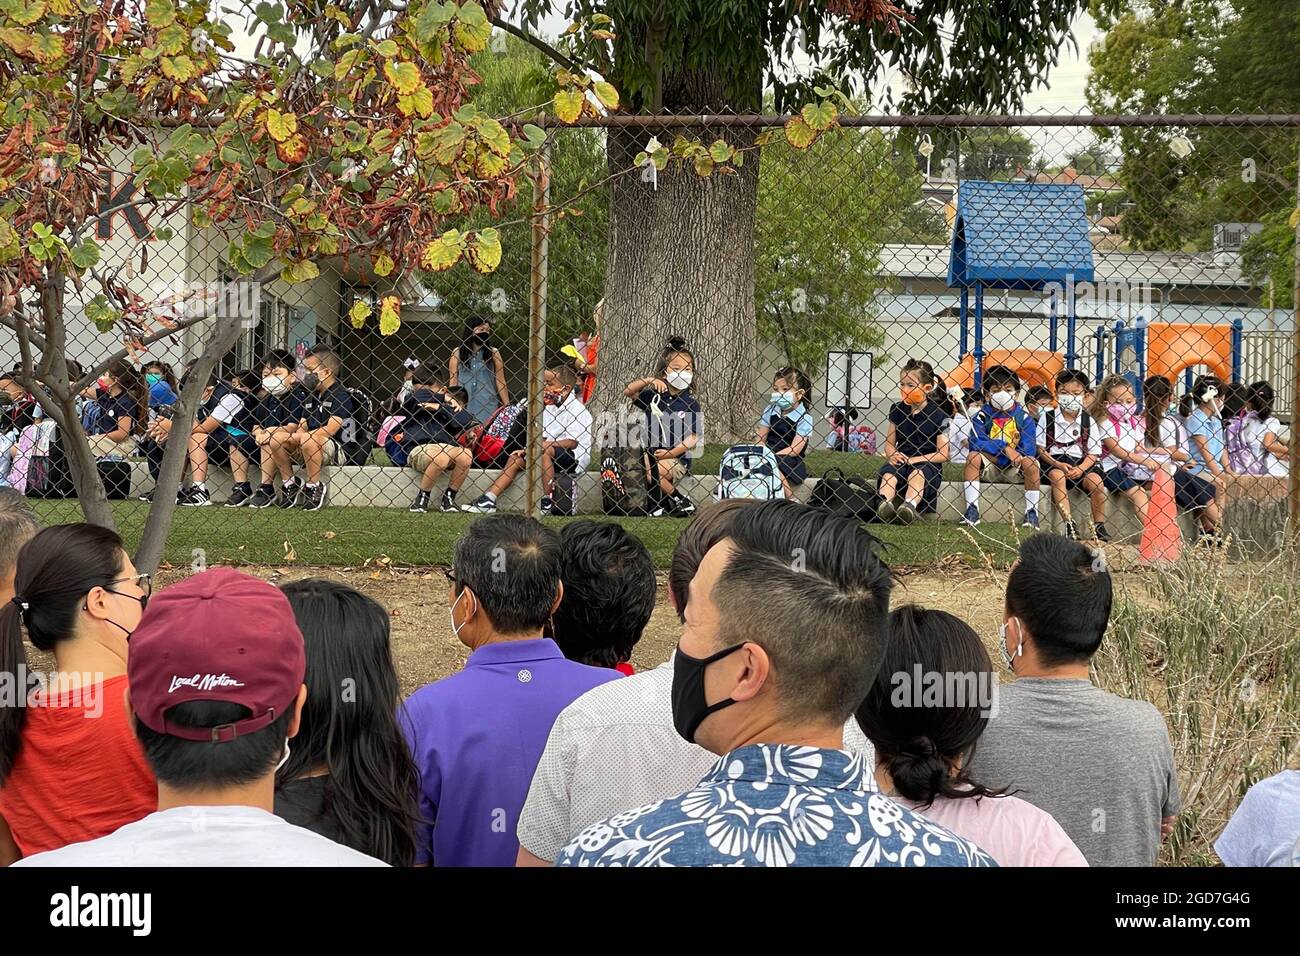 People watch as students arrive for the first day of school at  Brightwood Elementary School, Wednesday, Aug. 11, 2021, in Monterey Park, Calif. Stock Photo